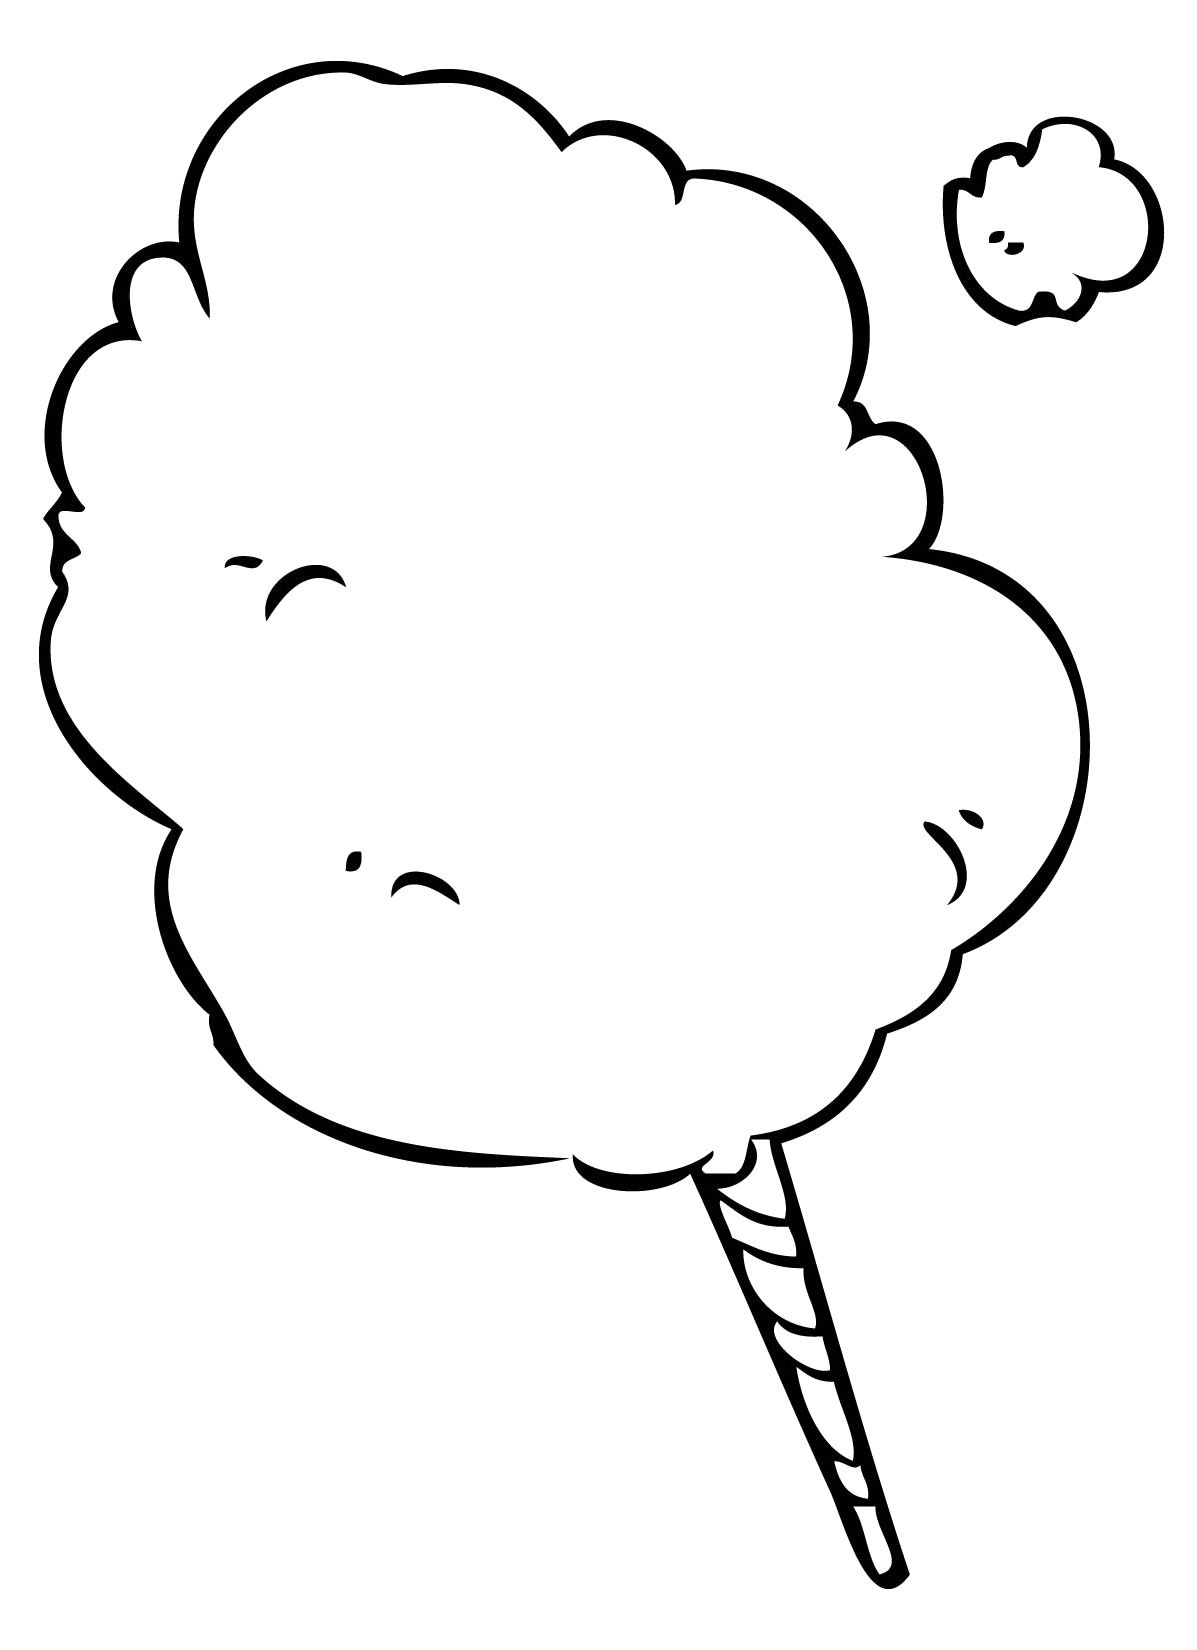 Printable Cotton Candy Template